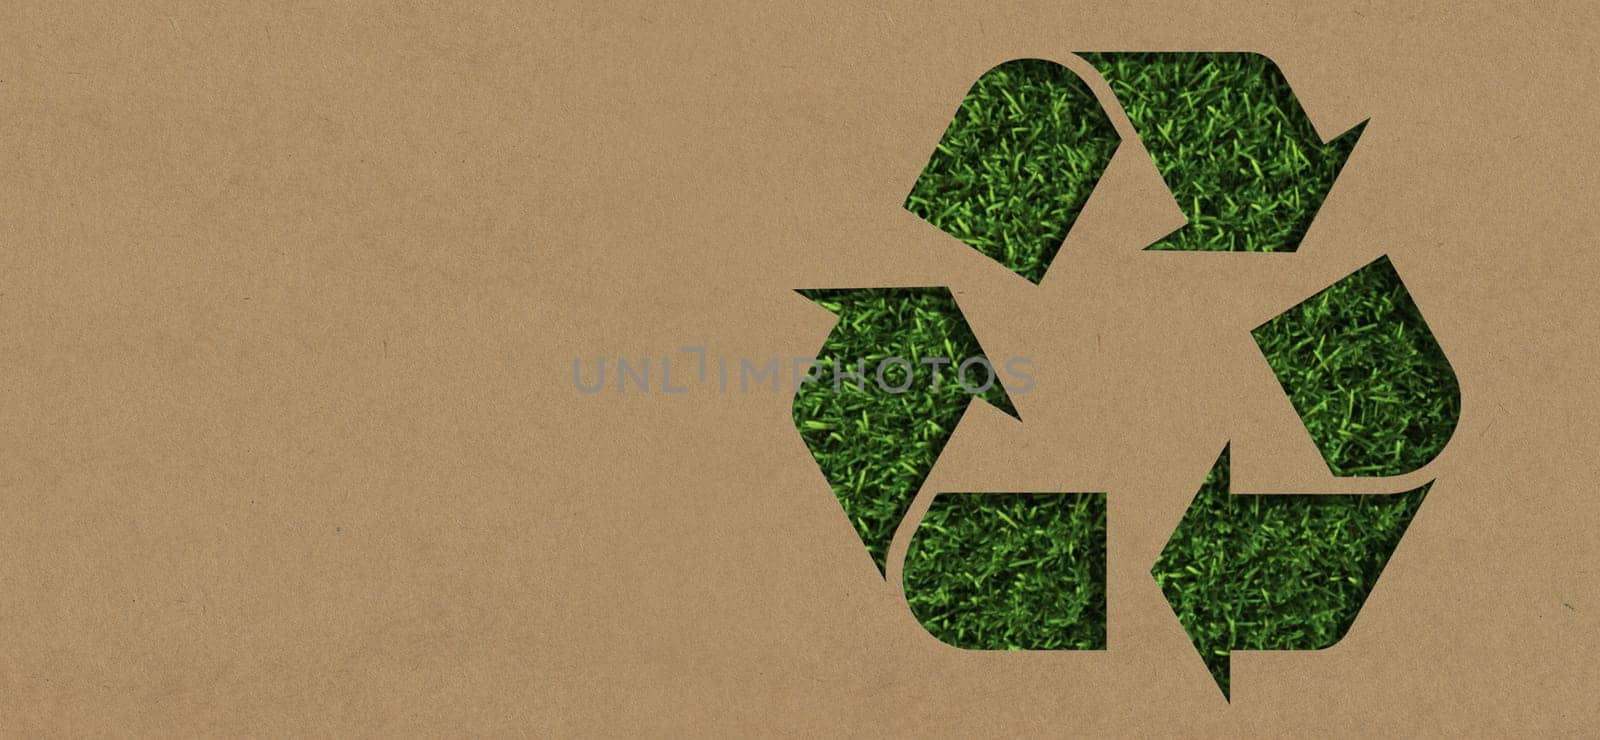 Grass, mockup and cardboard with recycle arrow for sustainability, environment and package pollution. Recycling, earth day and energy with eco friendly sign for reusable, clean energy and nature.